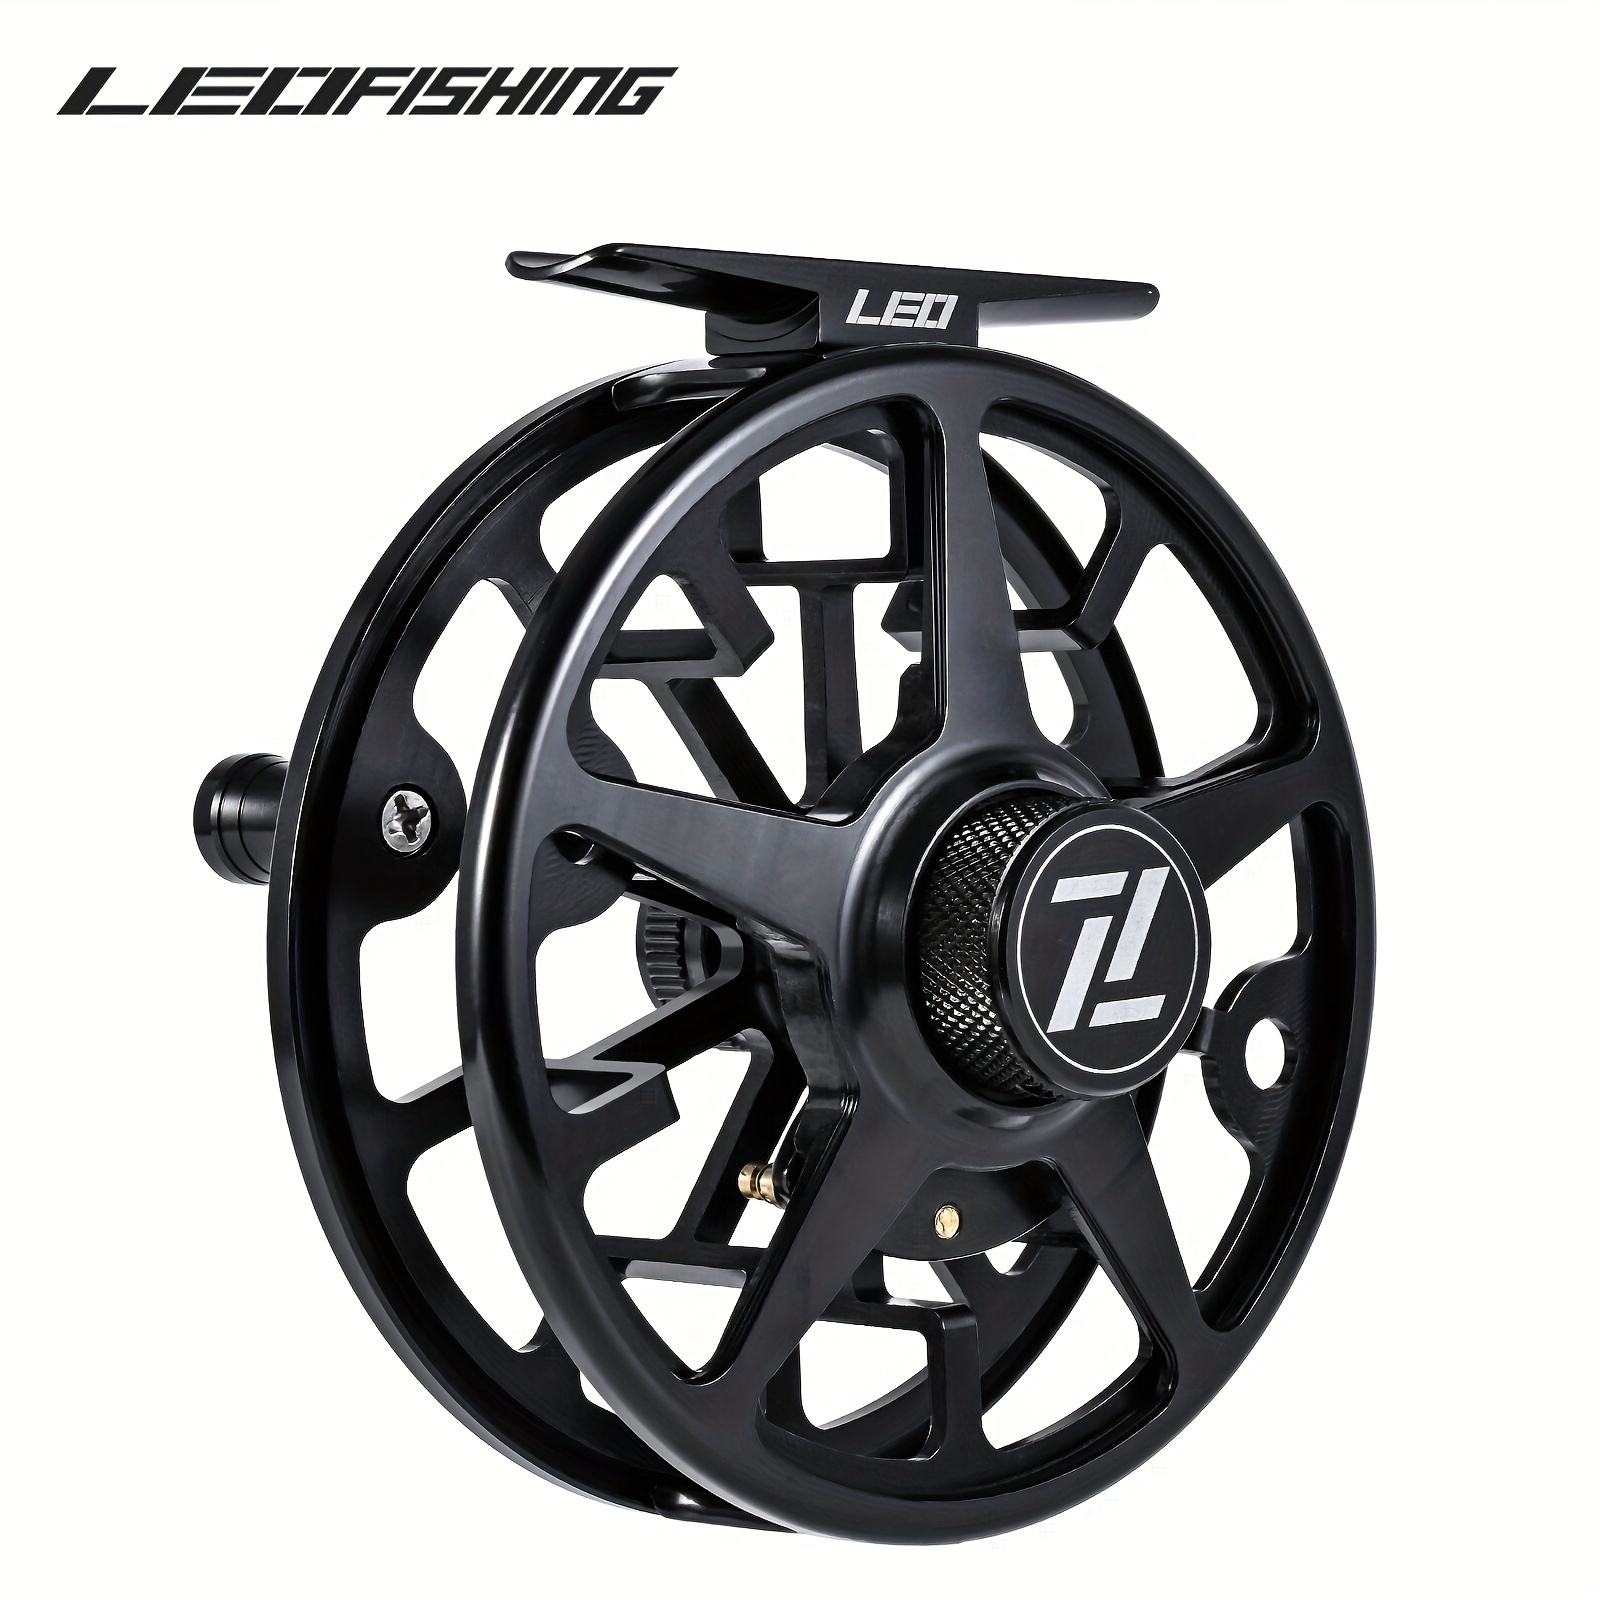 Fly Fishing Reel 3/4 5/6 WT Interchangeable Large Arbor Alloy Aluminum For  Fly Fishing Reel Wheel Accessories